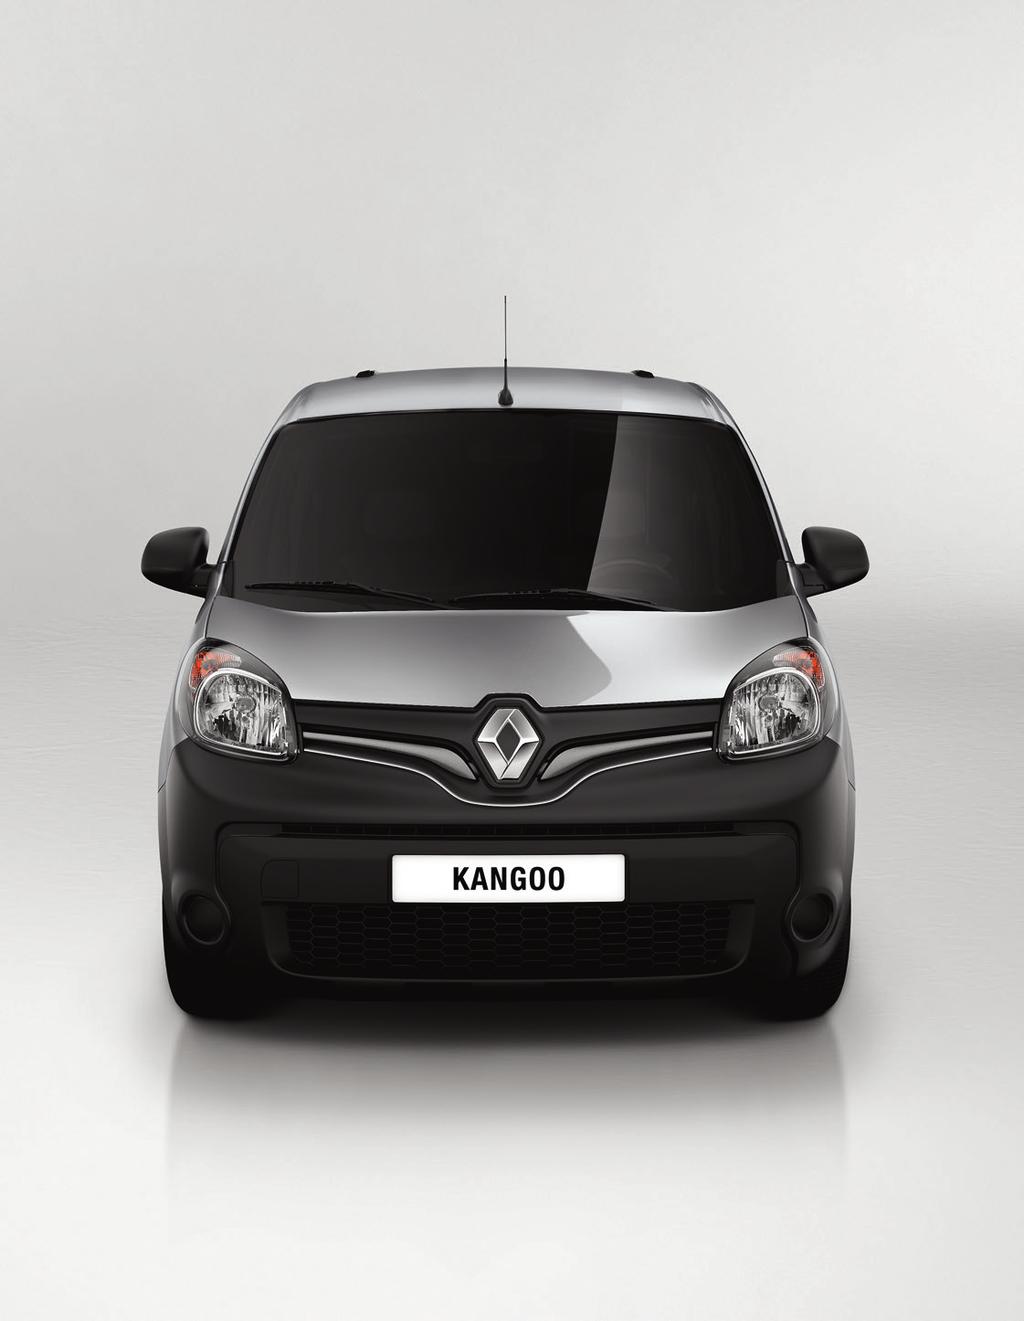 The Renault Kangoo was designed to make working in highly urbanised areas easier, safer and more comfortable.